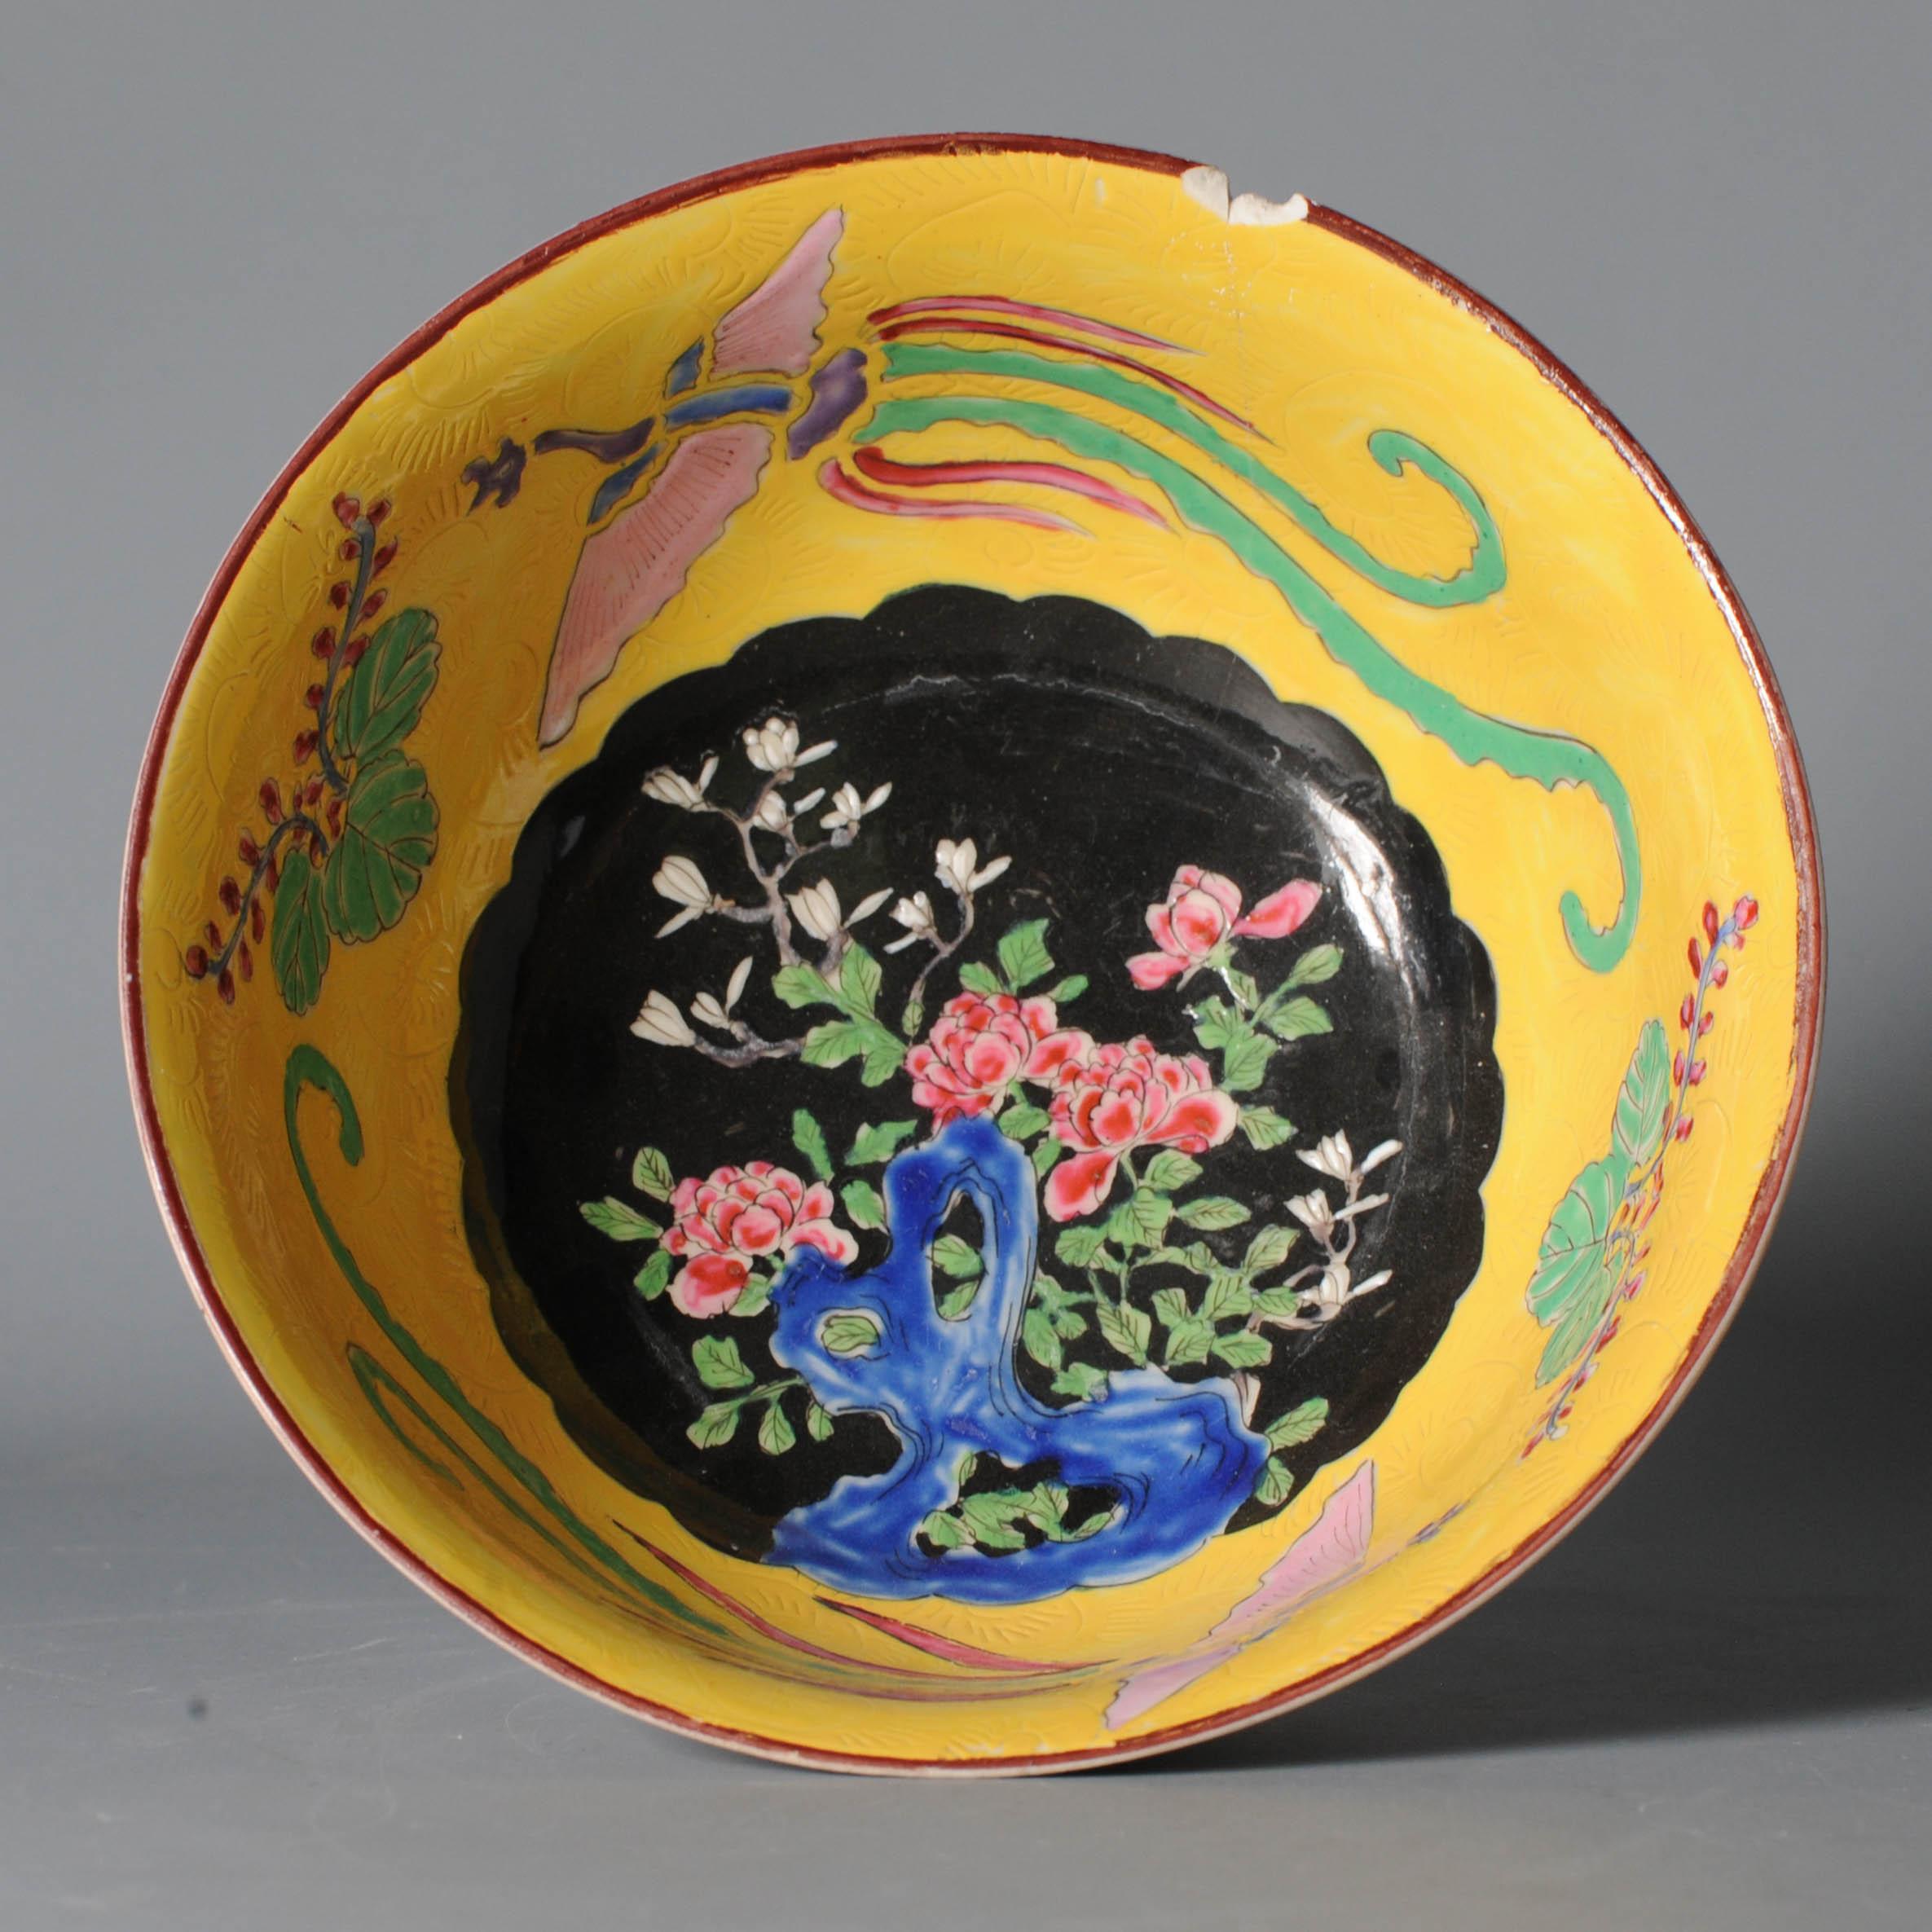 A very nice and colorful yamatoku bowl.

With a colorfull scene of flowers, and fenghuang. The wall on the inside is incised with flowers.

Additional information:
Material: Porcelain & Pottery
Type: Bowls
Region of Origin: Japan
Period: 19th